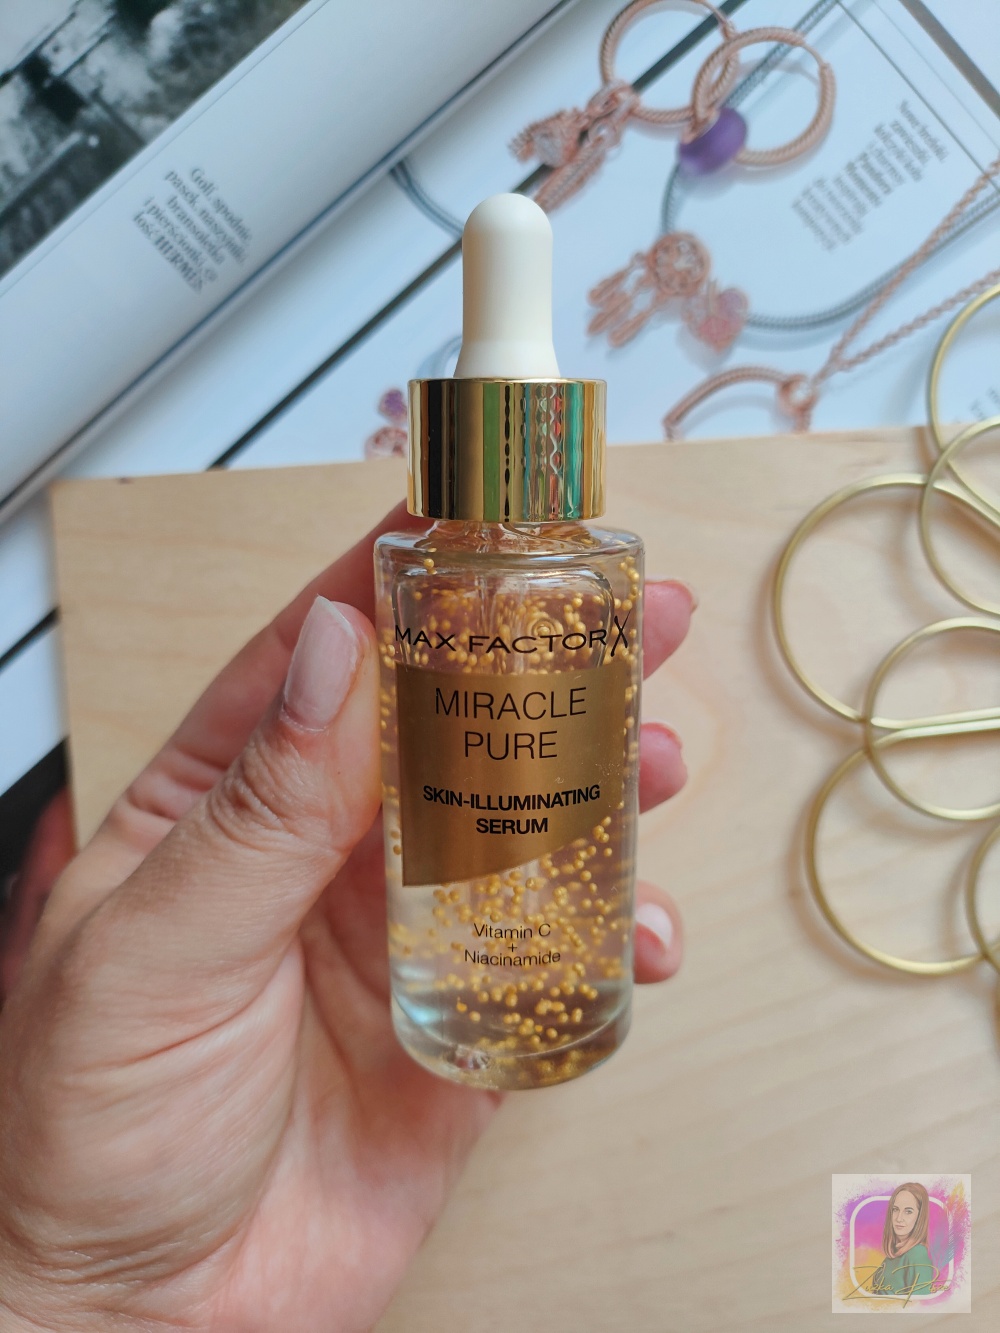 NOWOŚĆ! Max Factor MIRACLE PURE serum